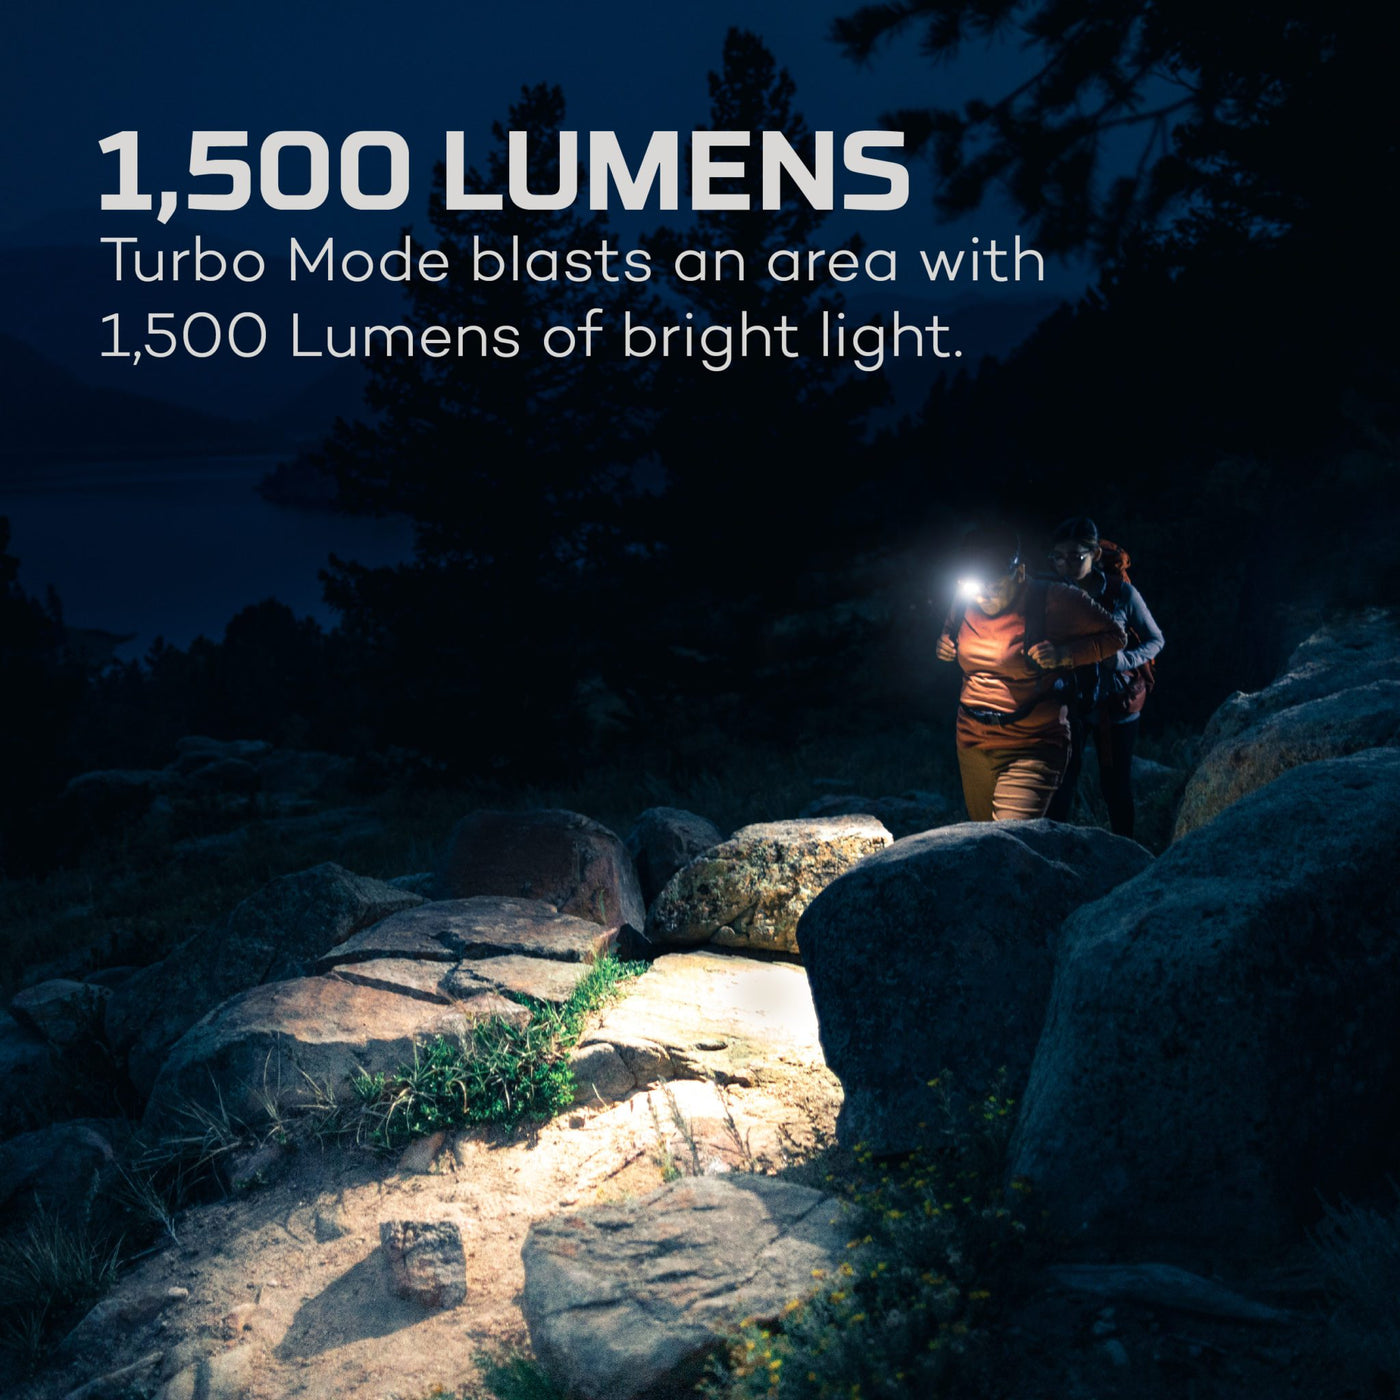 At Nebo Tools, we continually innovate so that we can offer the highest quality LED lighting products at the best price. The TRANSCEND 1500 is a powerful, USB-C rechargeable headlamp that features a 1,500 lumen Turbo Mode. The Mode Selector Dial and Smart Power Control enable the TRANSCEND 1500 to seamlessly transition through the different light modes.